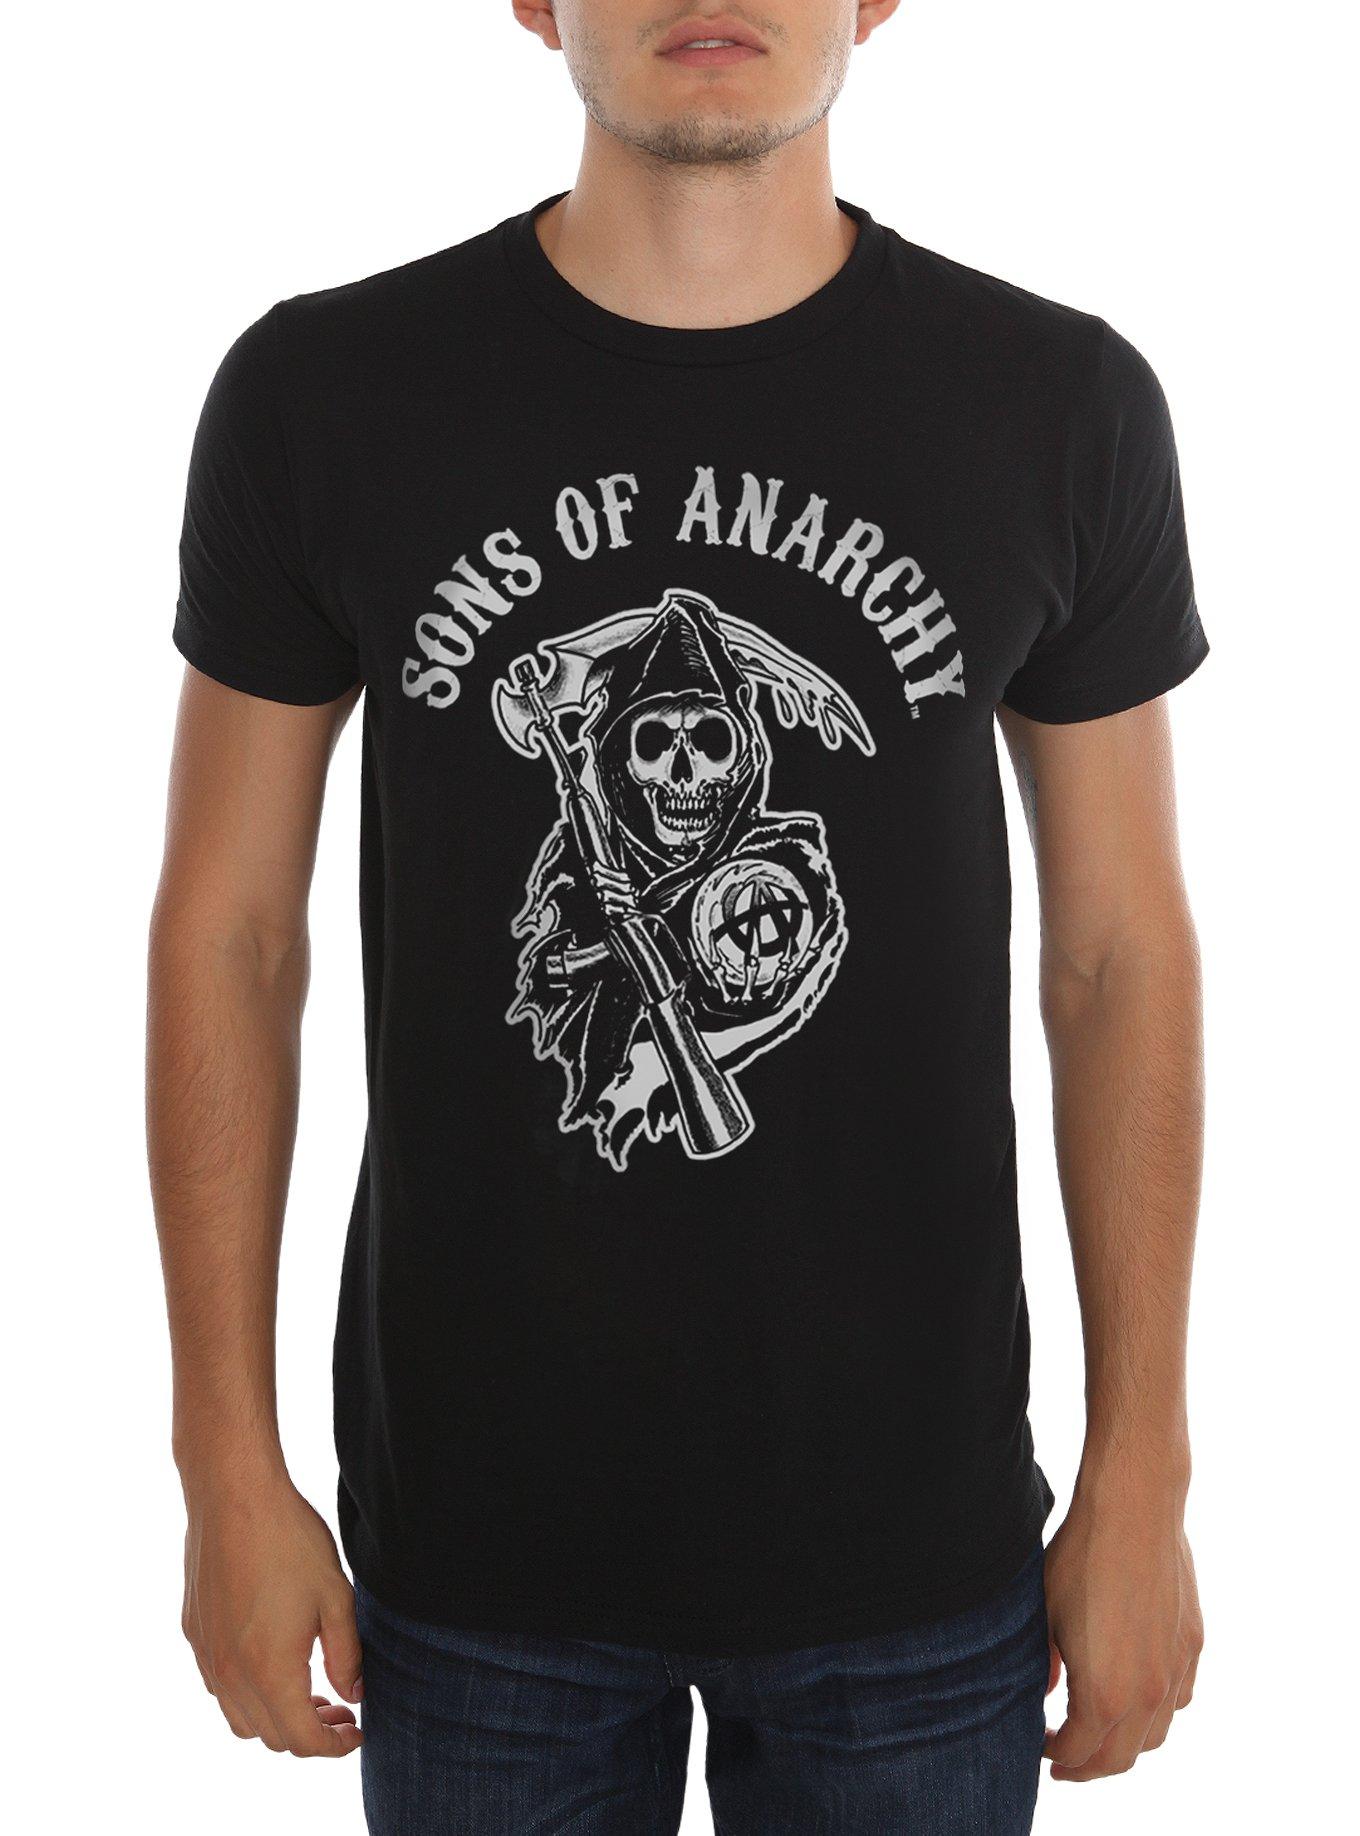 Hot T-Shirt Sons Anarchy Of Topic | Logo